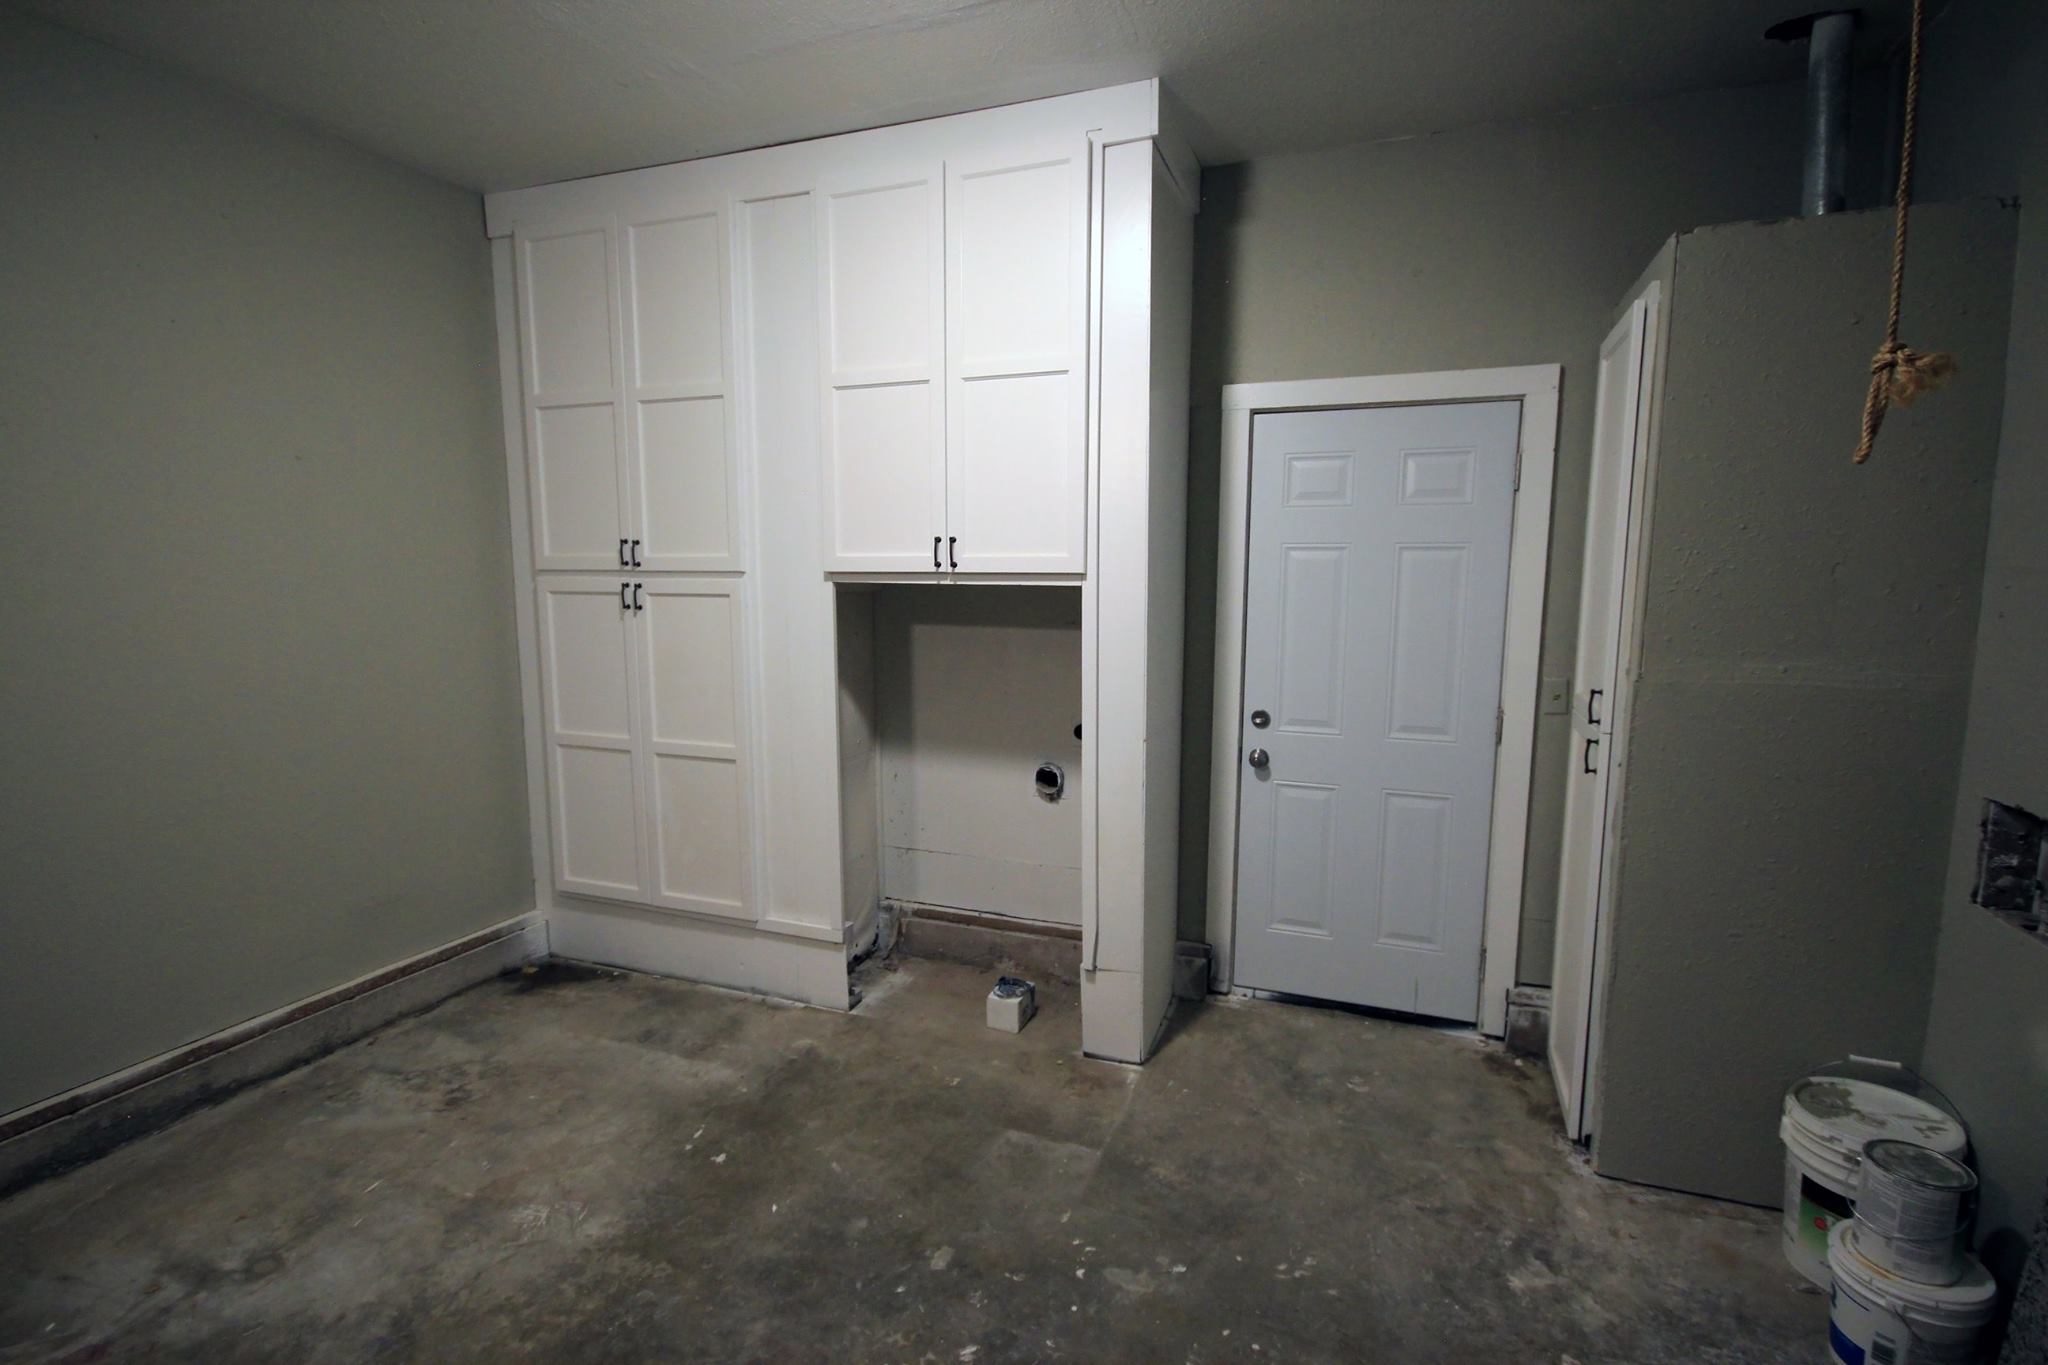 A room with two white cabinets and a door.